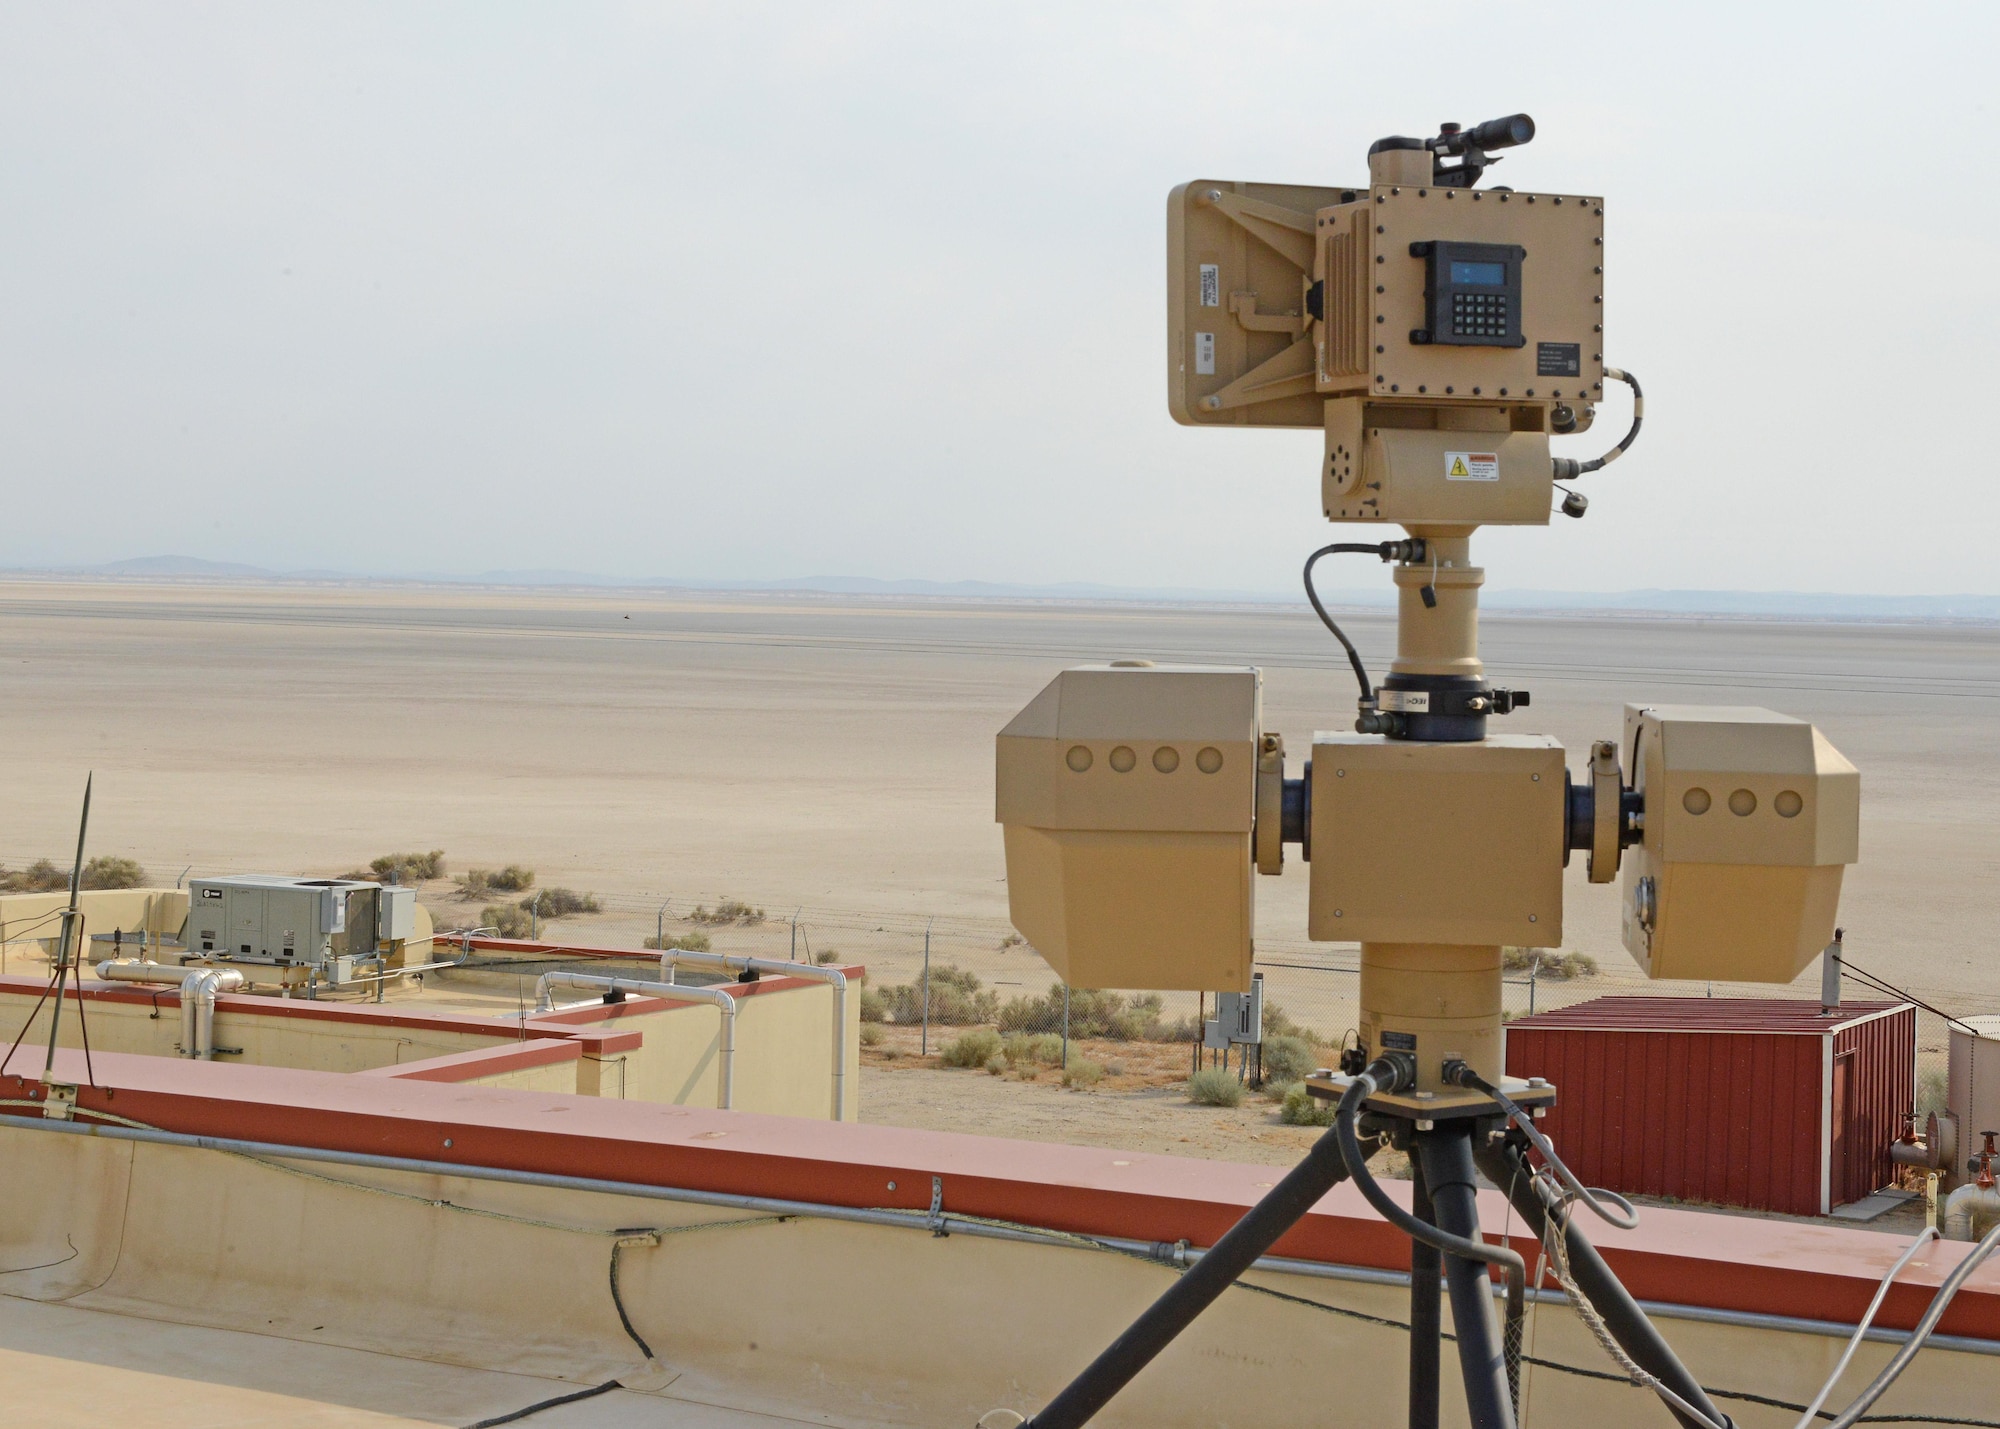 A surveillance system sits on top of a remote building at Edwards. The system was demonstrated to base leadership and 412th Security Forces Squadron personnel July 10. The ground-based radar system has the capability to monitor the lakebed at great distances with electro-optical and infrared sensors. (U.S. Air Force photo by Kenji Thuloweit)